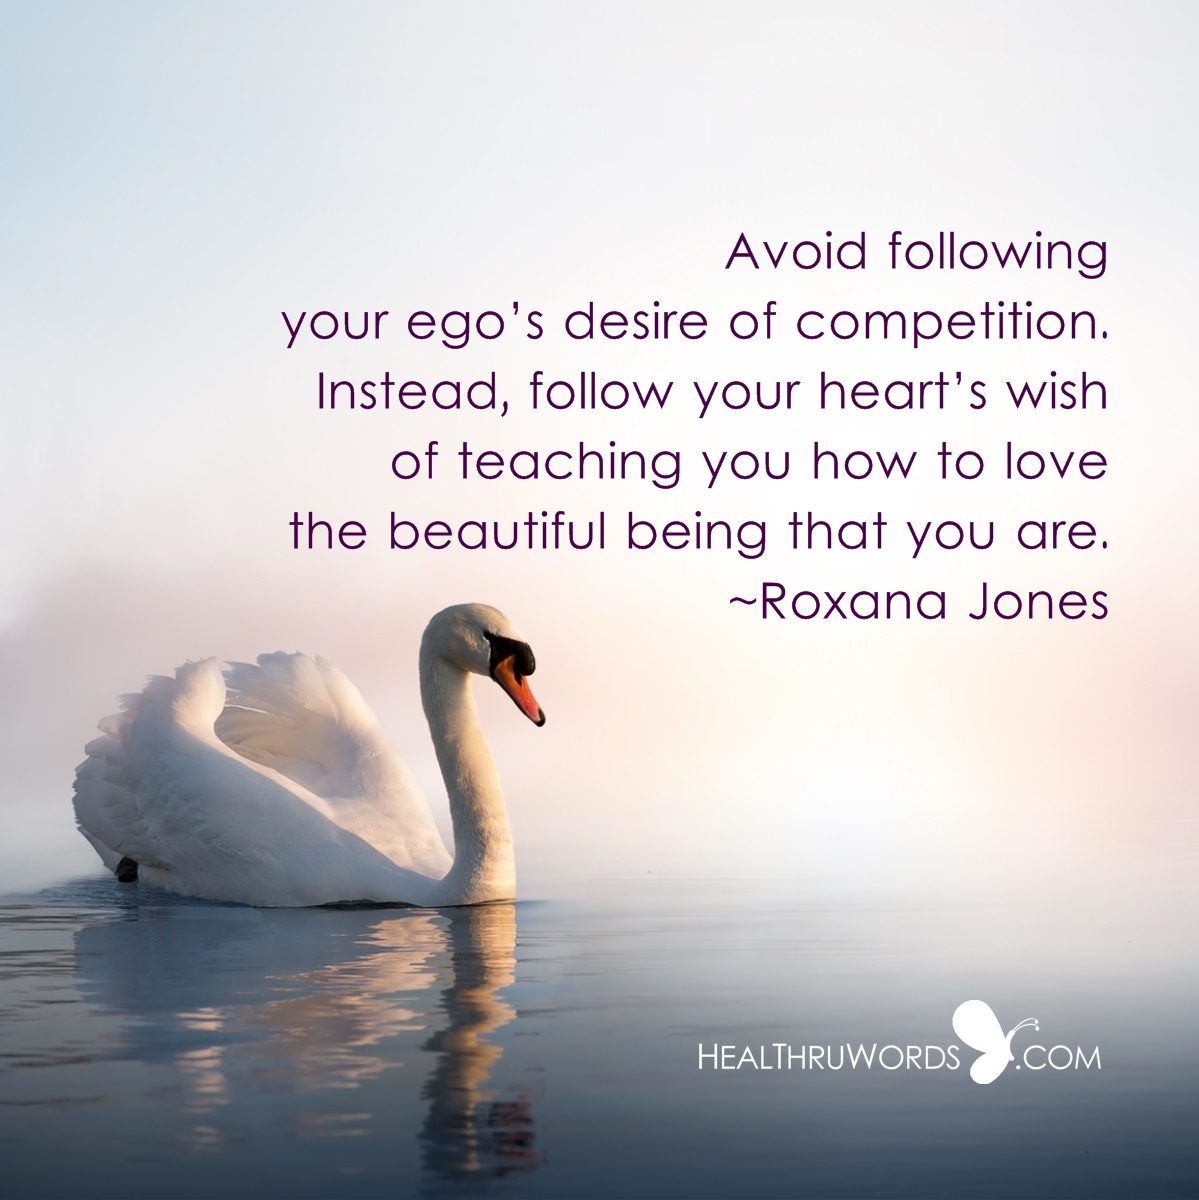 Avoid following your ego's desire of competition. Instead, follow your heart's wish of teaching you how to love the beautiful being that you are.